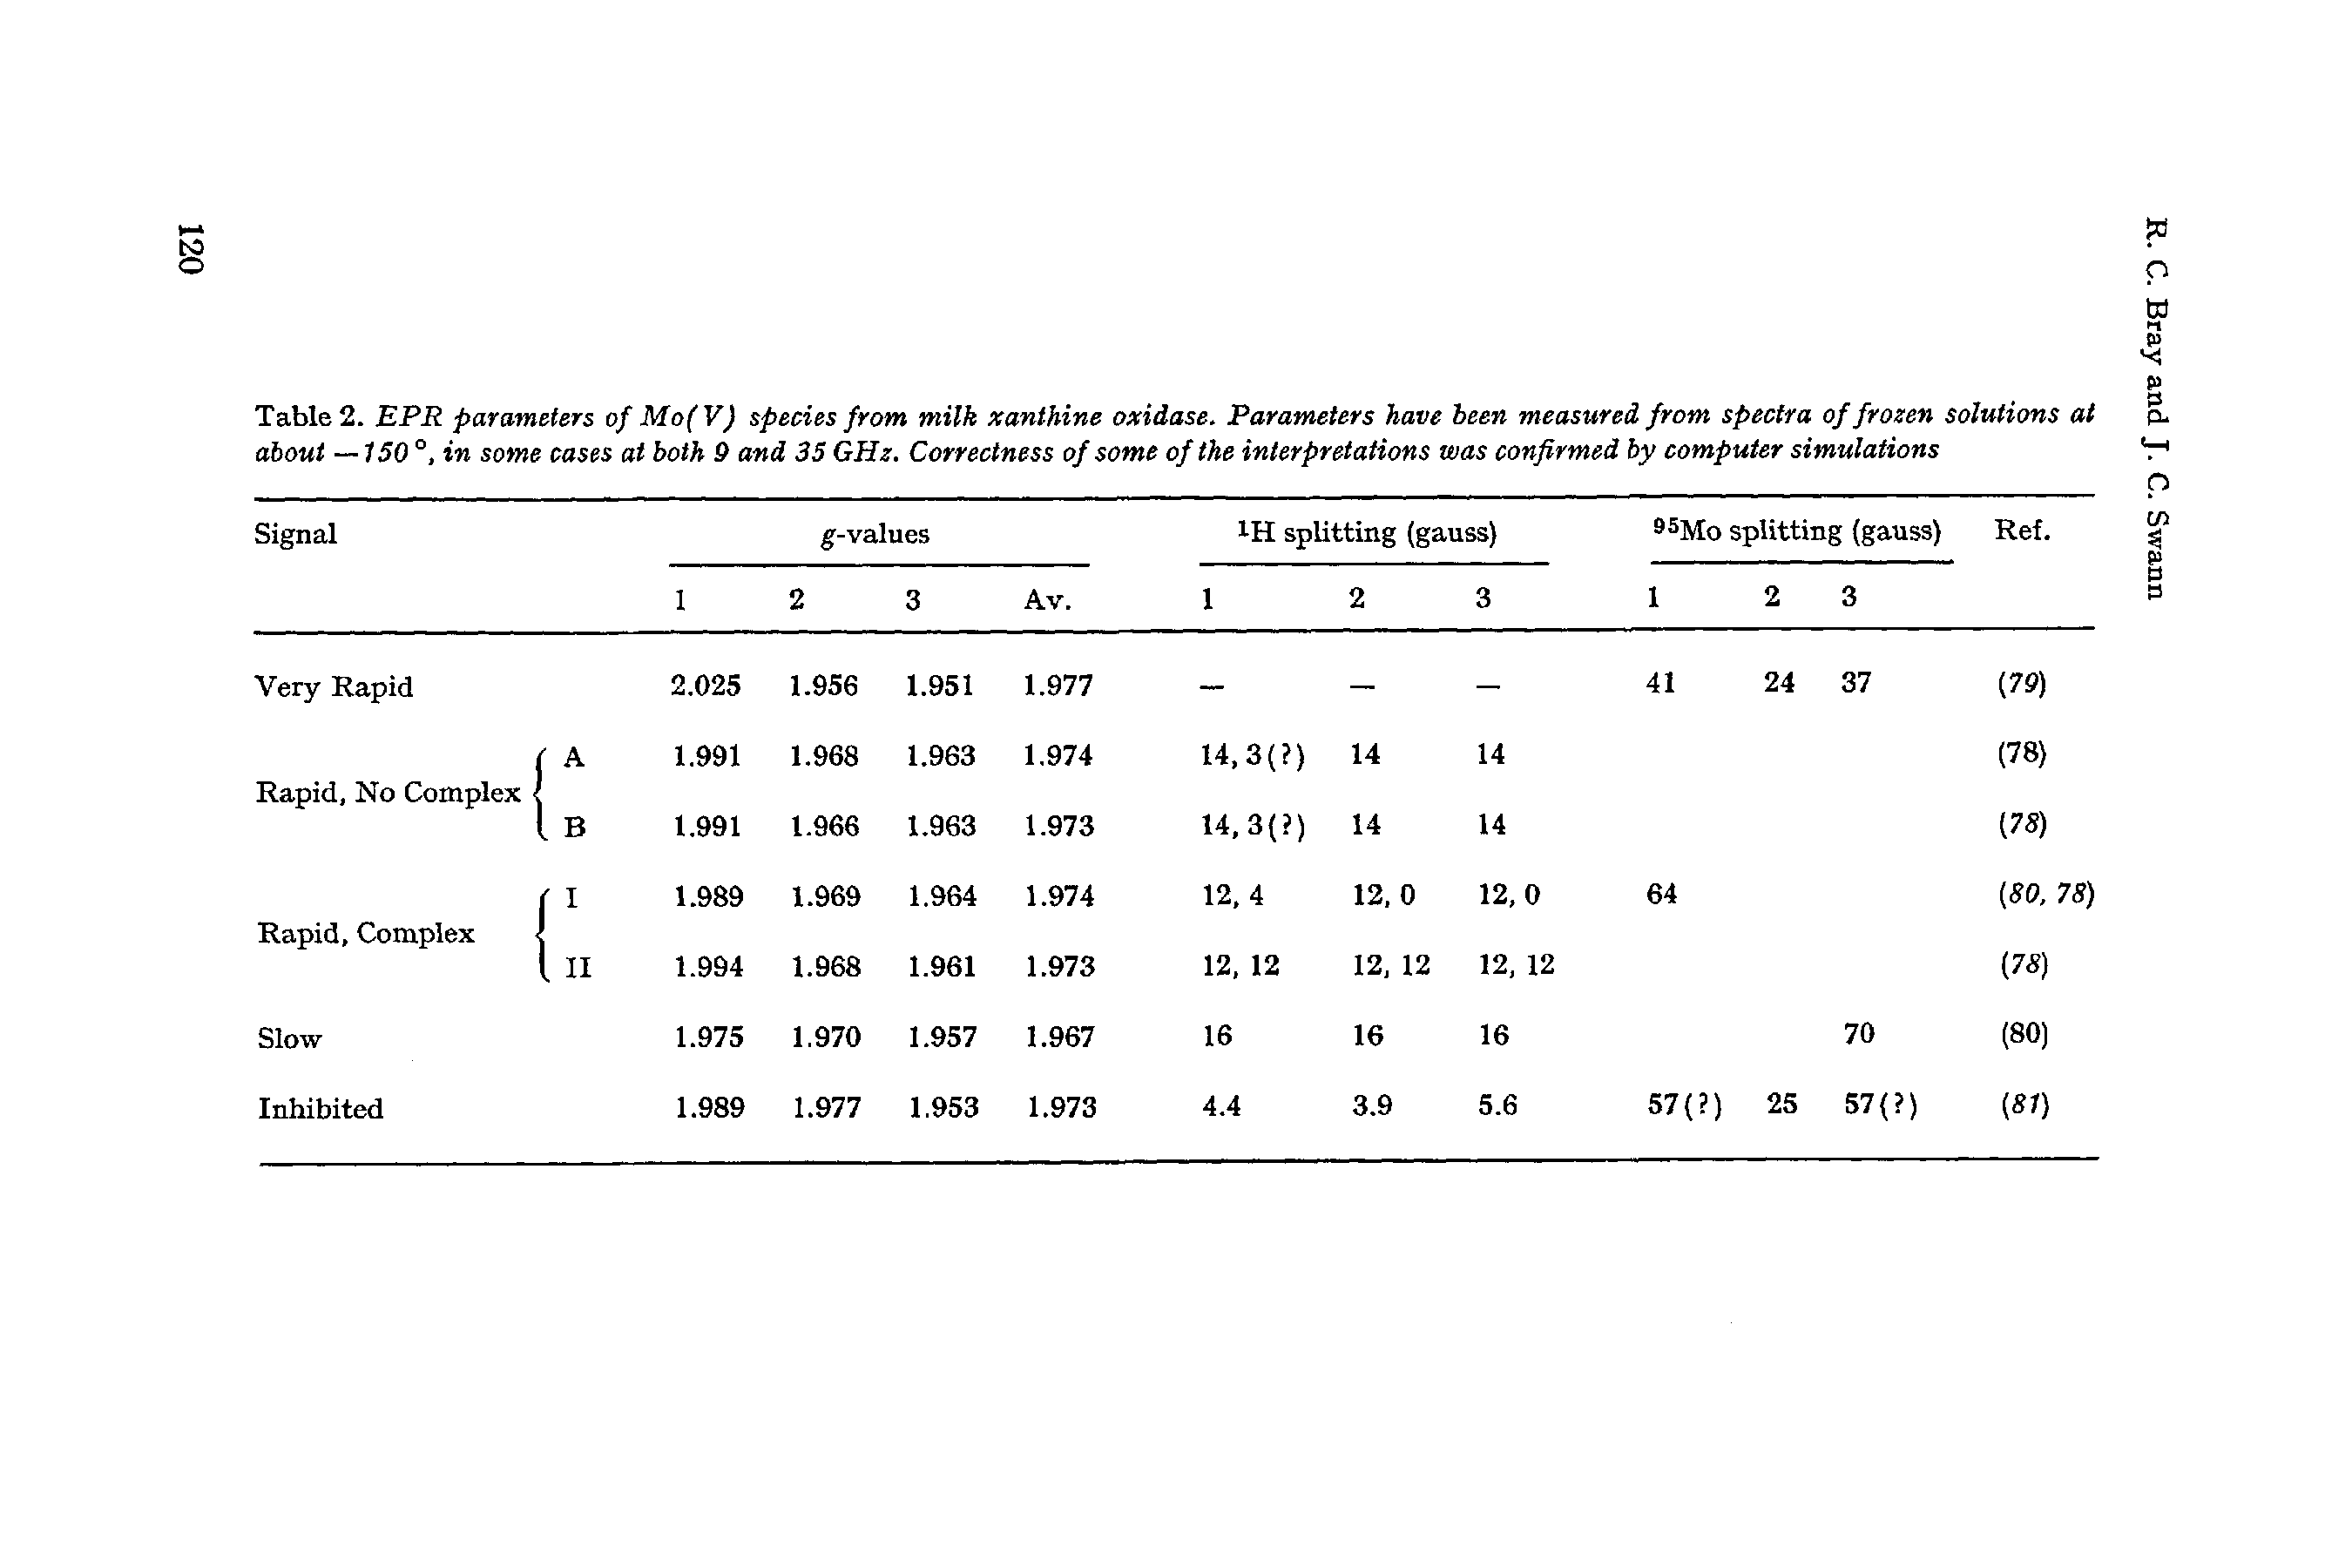 Table 2. EPR parameters of Mo(V) species from milk xanthine oxidase. Parameters have been measured from spectra of frozen solutions at about —150°, in some cases at both 9 and 35 GHz. Correctness of some of the interpretations was confirmed by computer simulations...